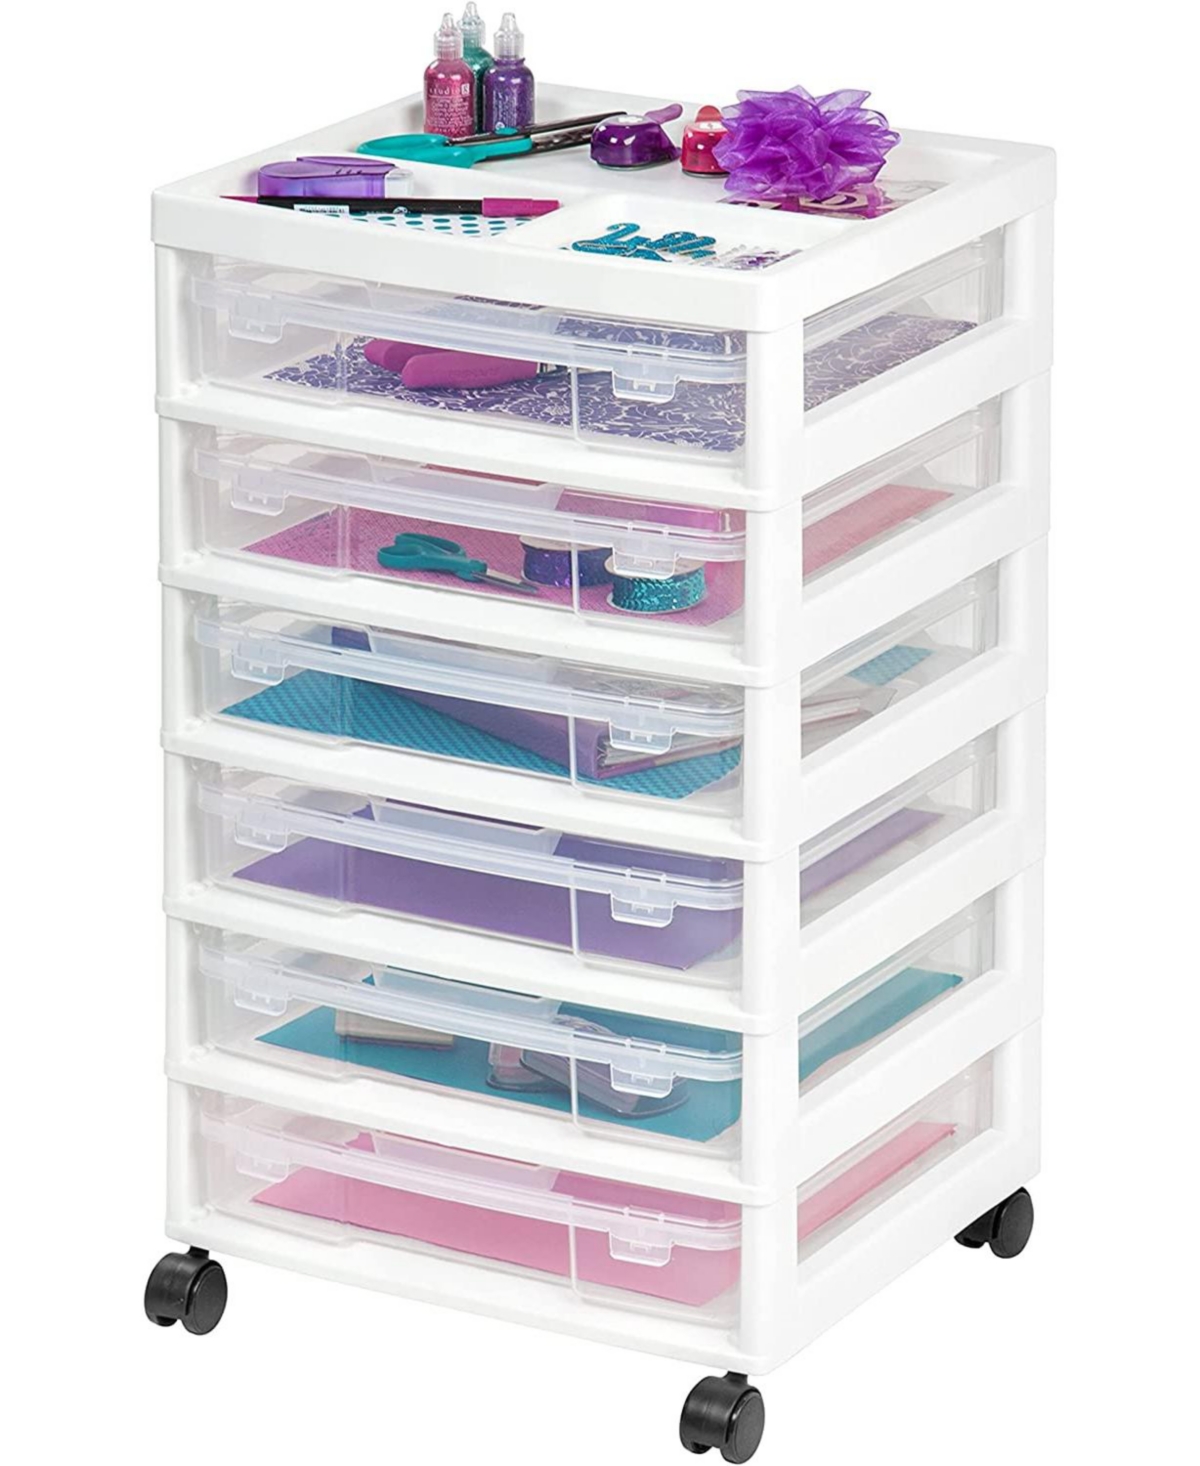 Fits 12" x 12" Paper, 6-Tier Scrapbook Rolling Storage Cart with Organizer Top for Papers Vinyl Tools Office Art and Craft Supplies Yarn Whit